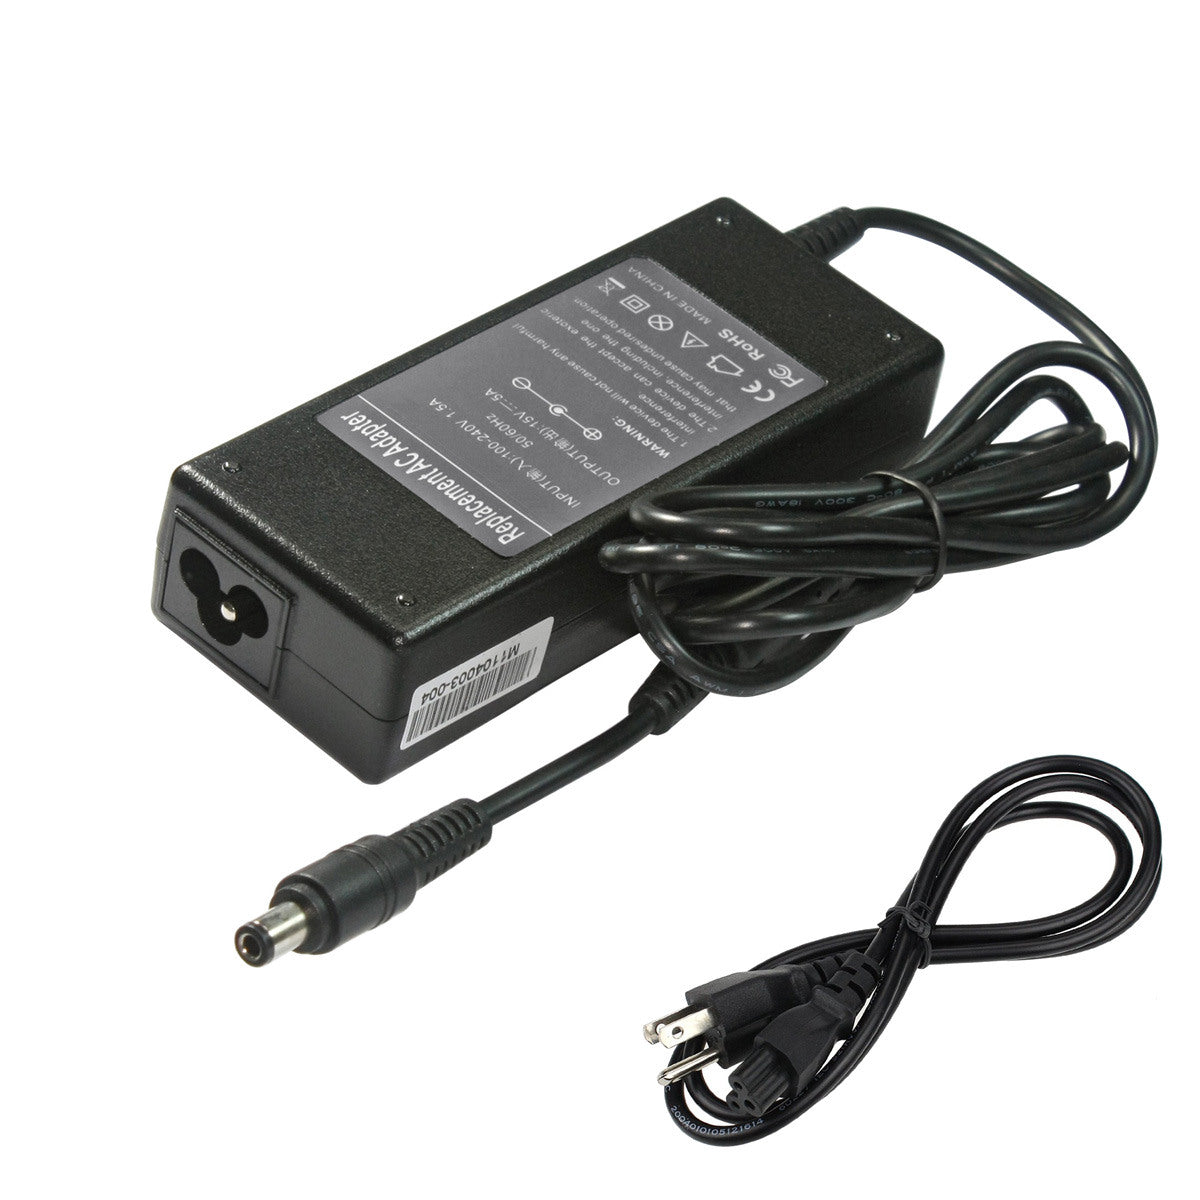 Compatible Replacement Toshiba Satellite M115-S3144 AC Adapter.